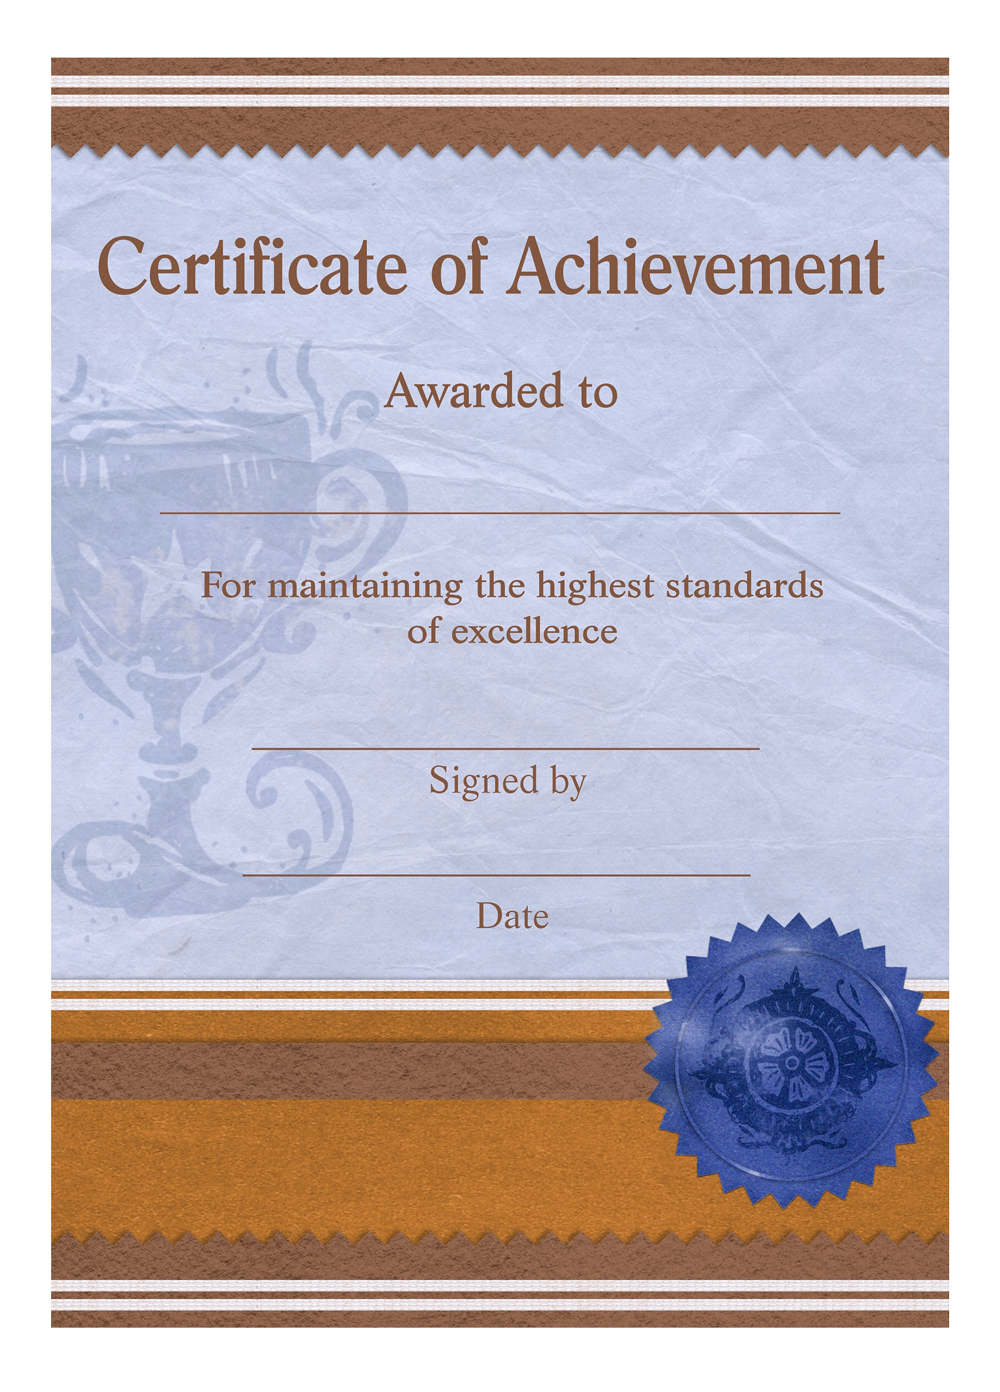 Certificate of Achievement Template PNG Image